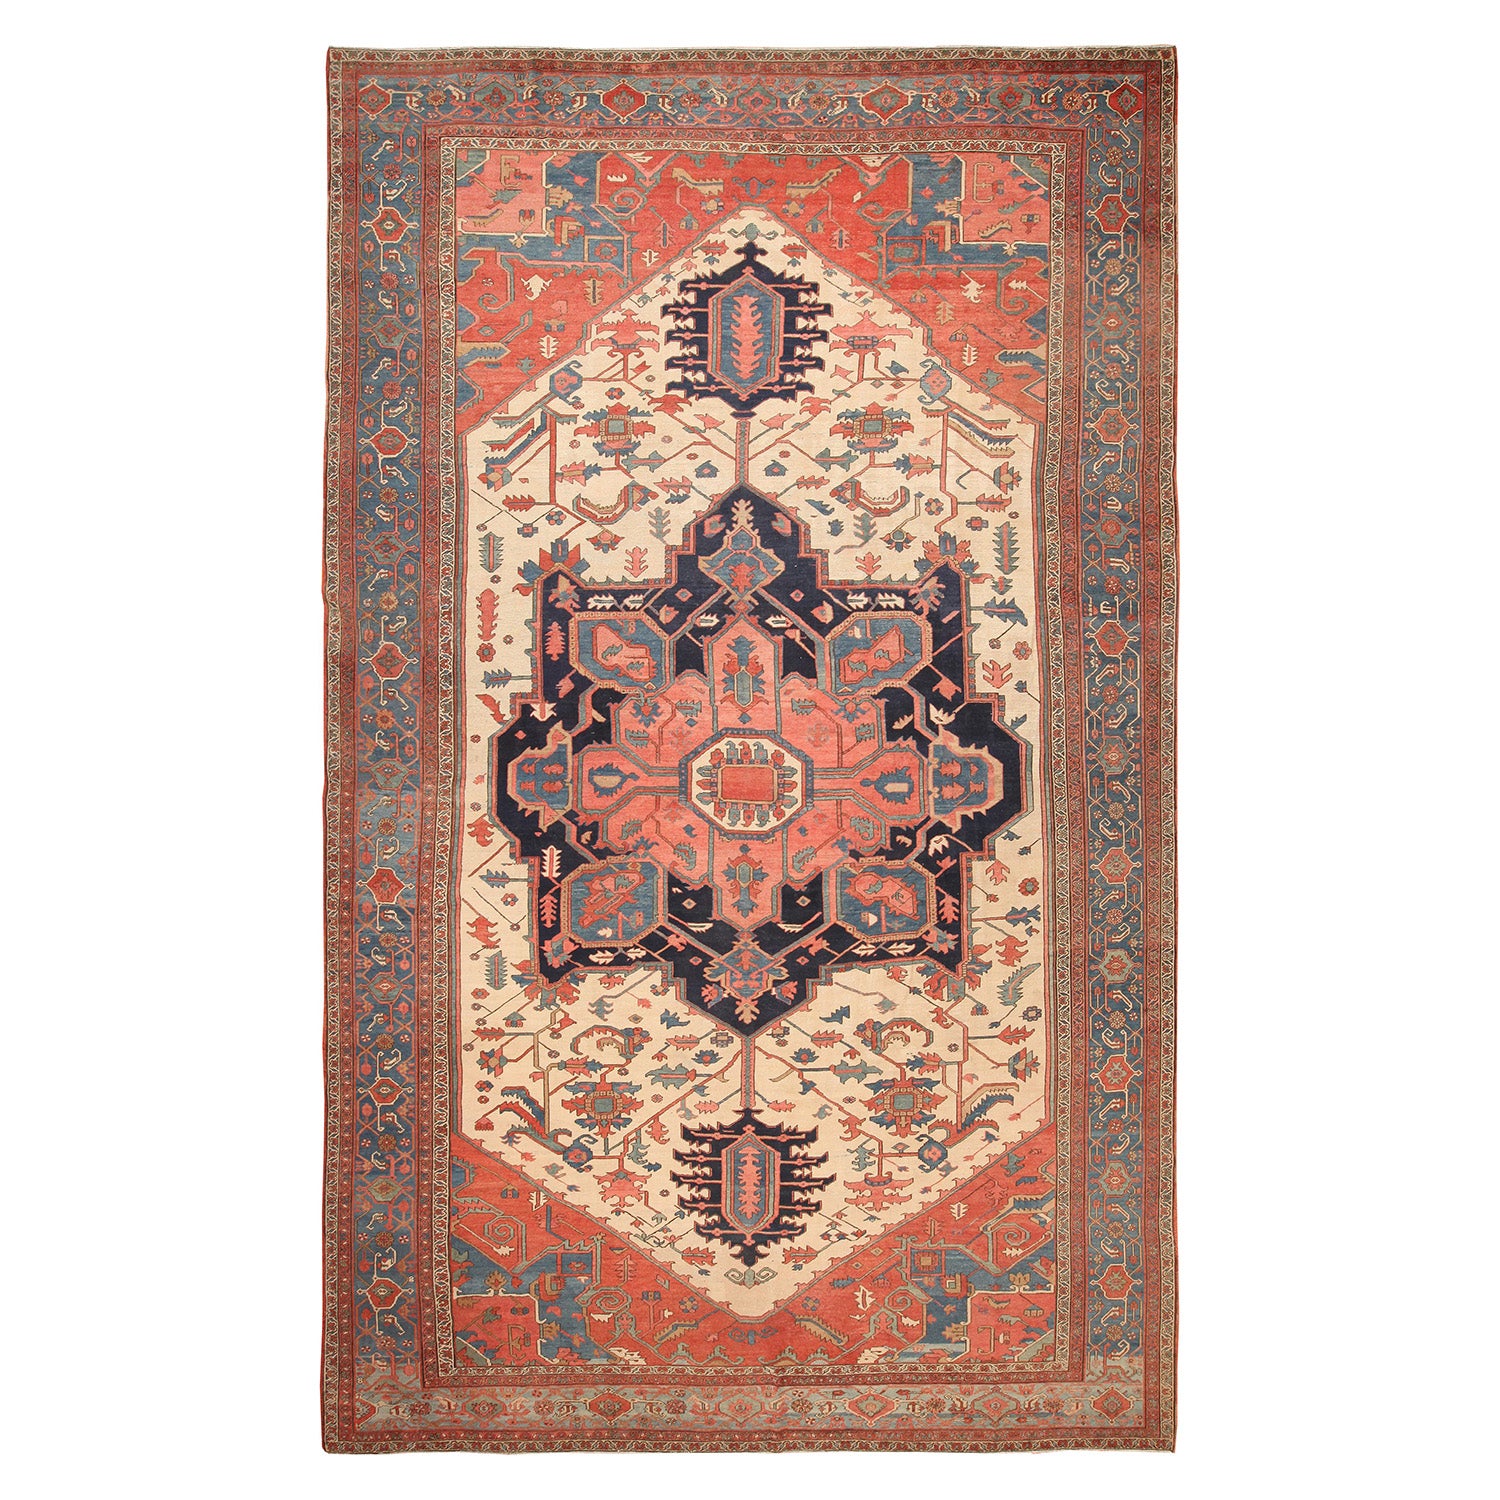 Red Antique Wool Persian Rug - 11'10" x 19'1"